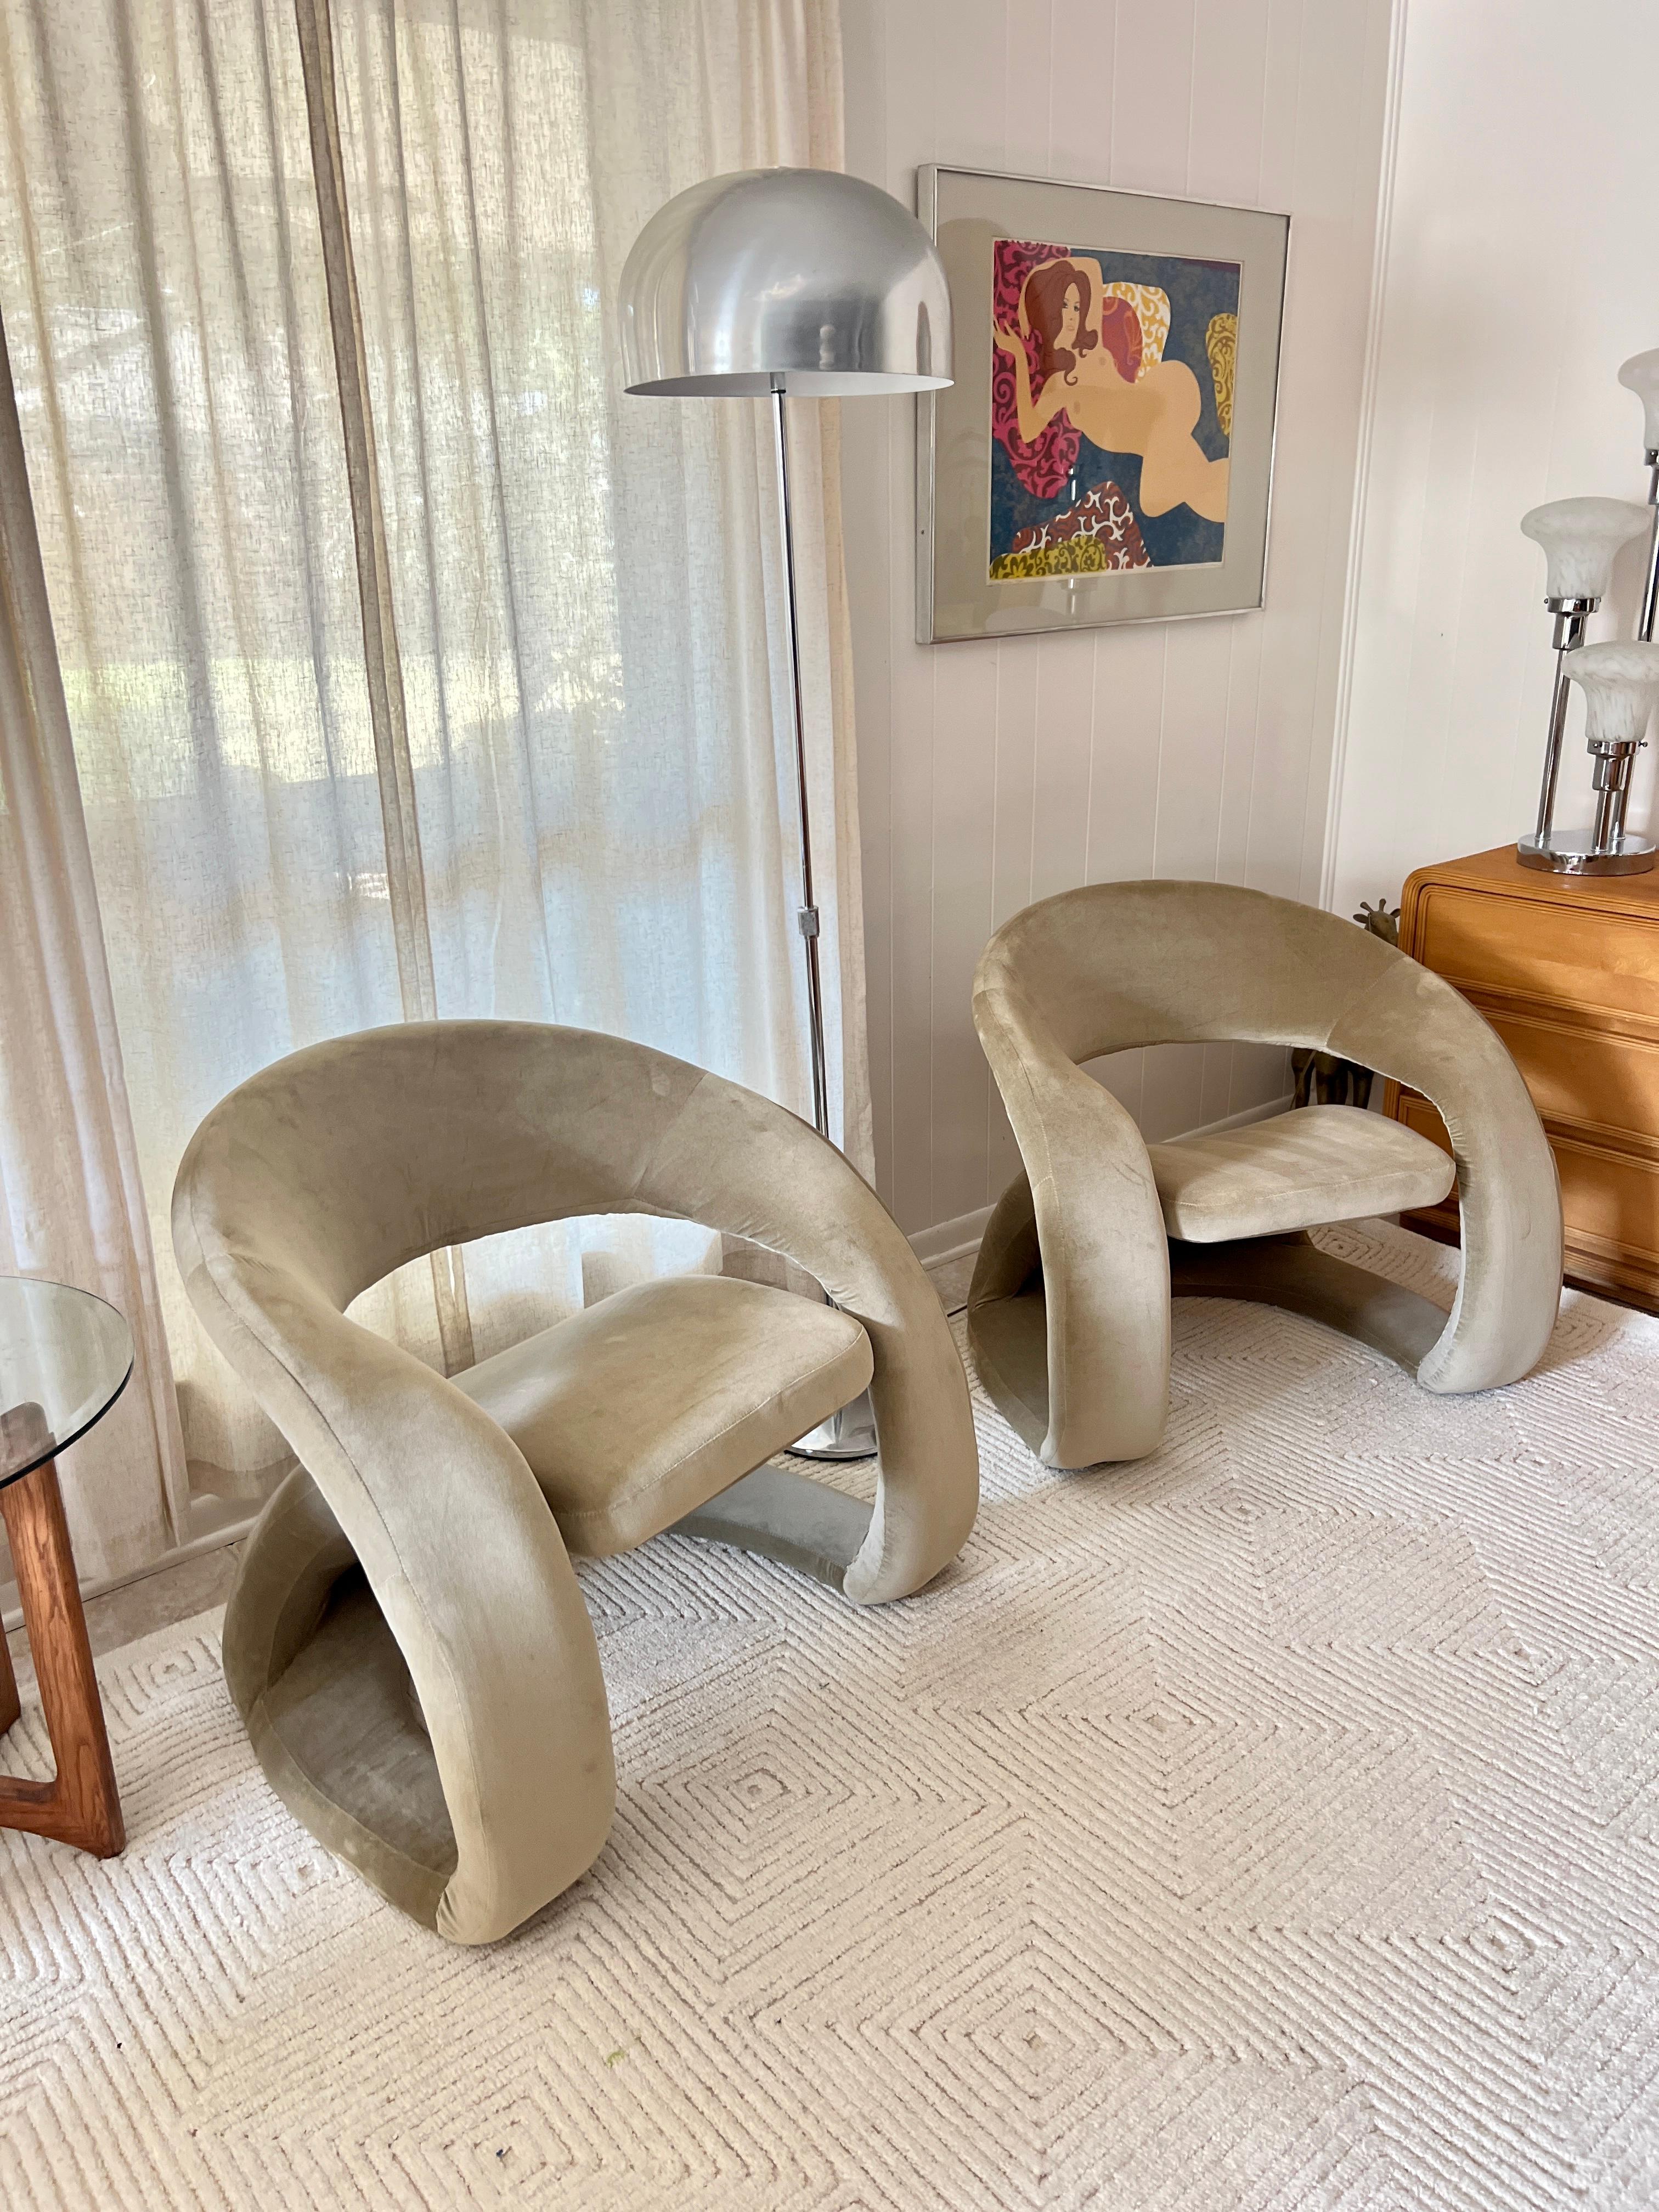 Late 20th Century A pair of sculptural tongue chairs by Jaymar, circa 1980s. In sage green velvet